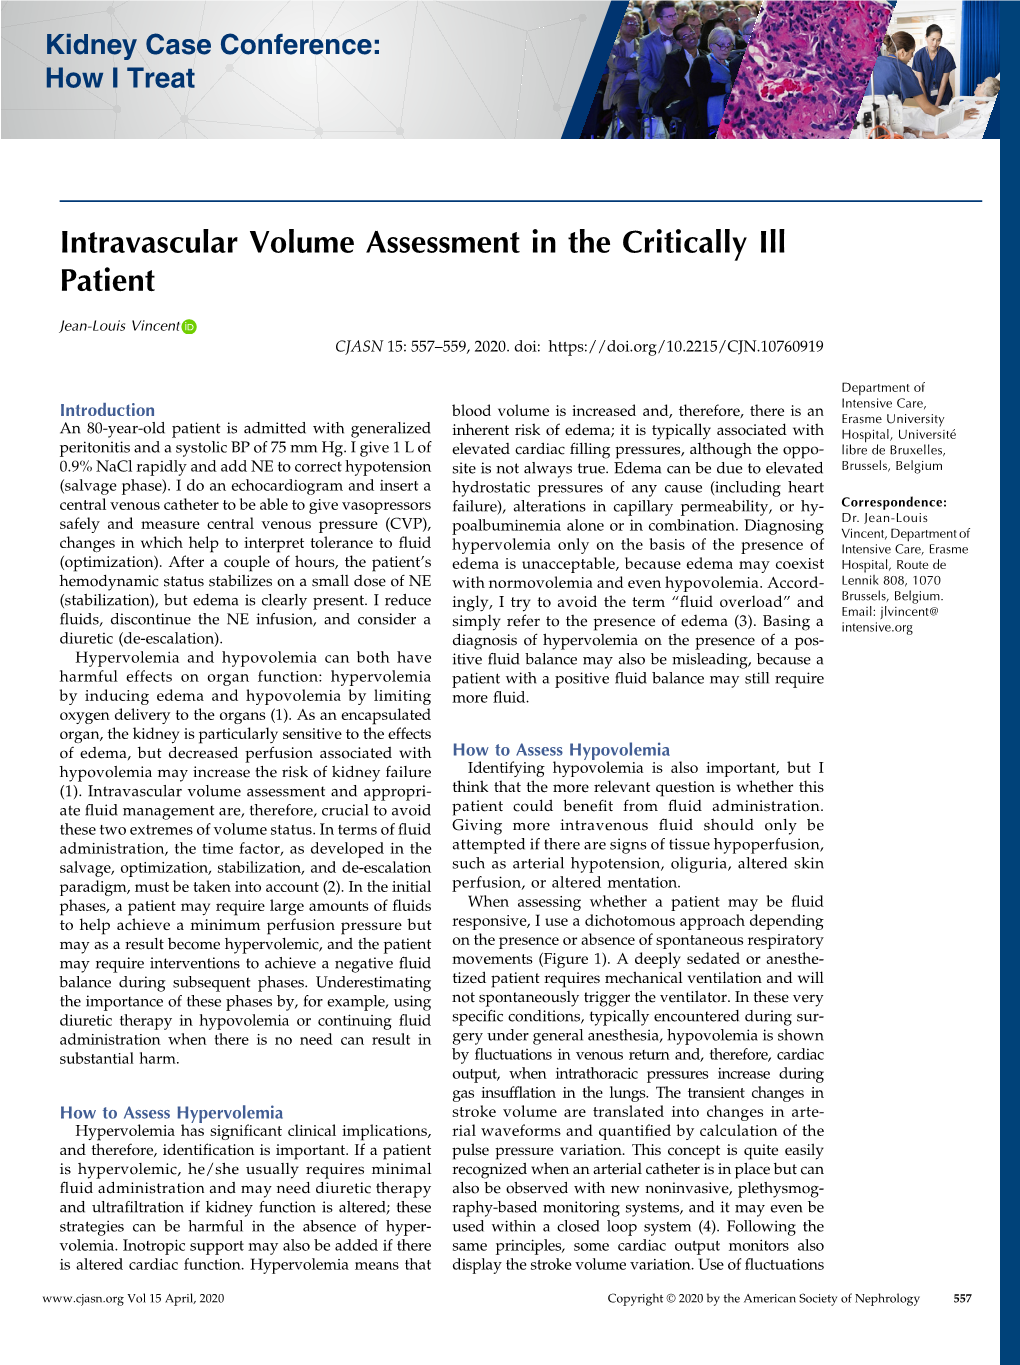 Intravascular Volume Assessment in the Critically Ill Patient